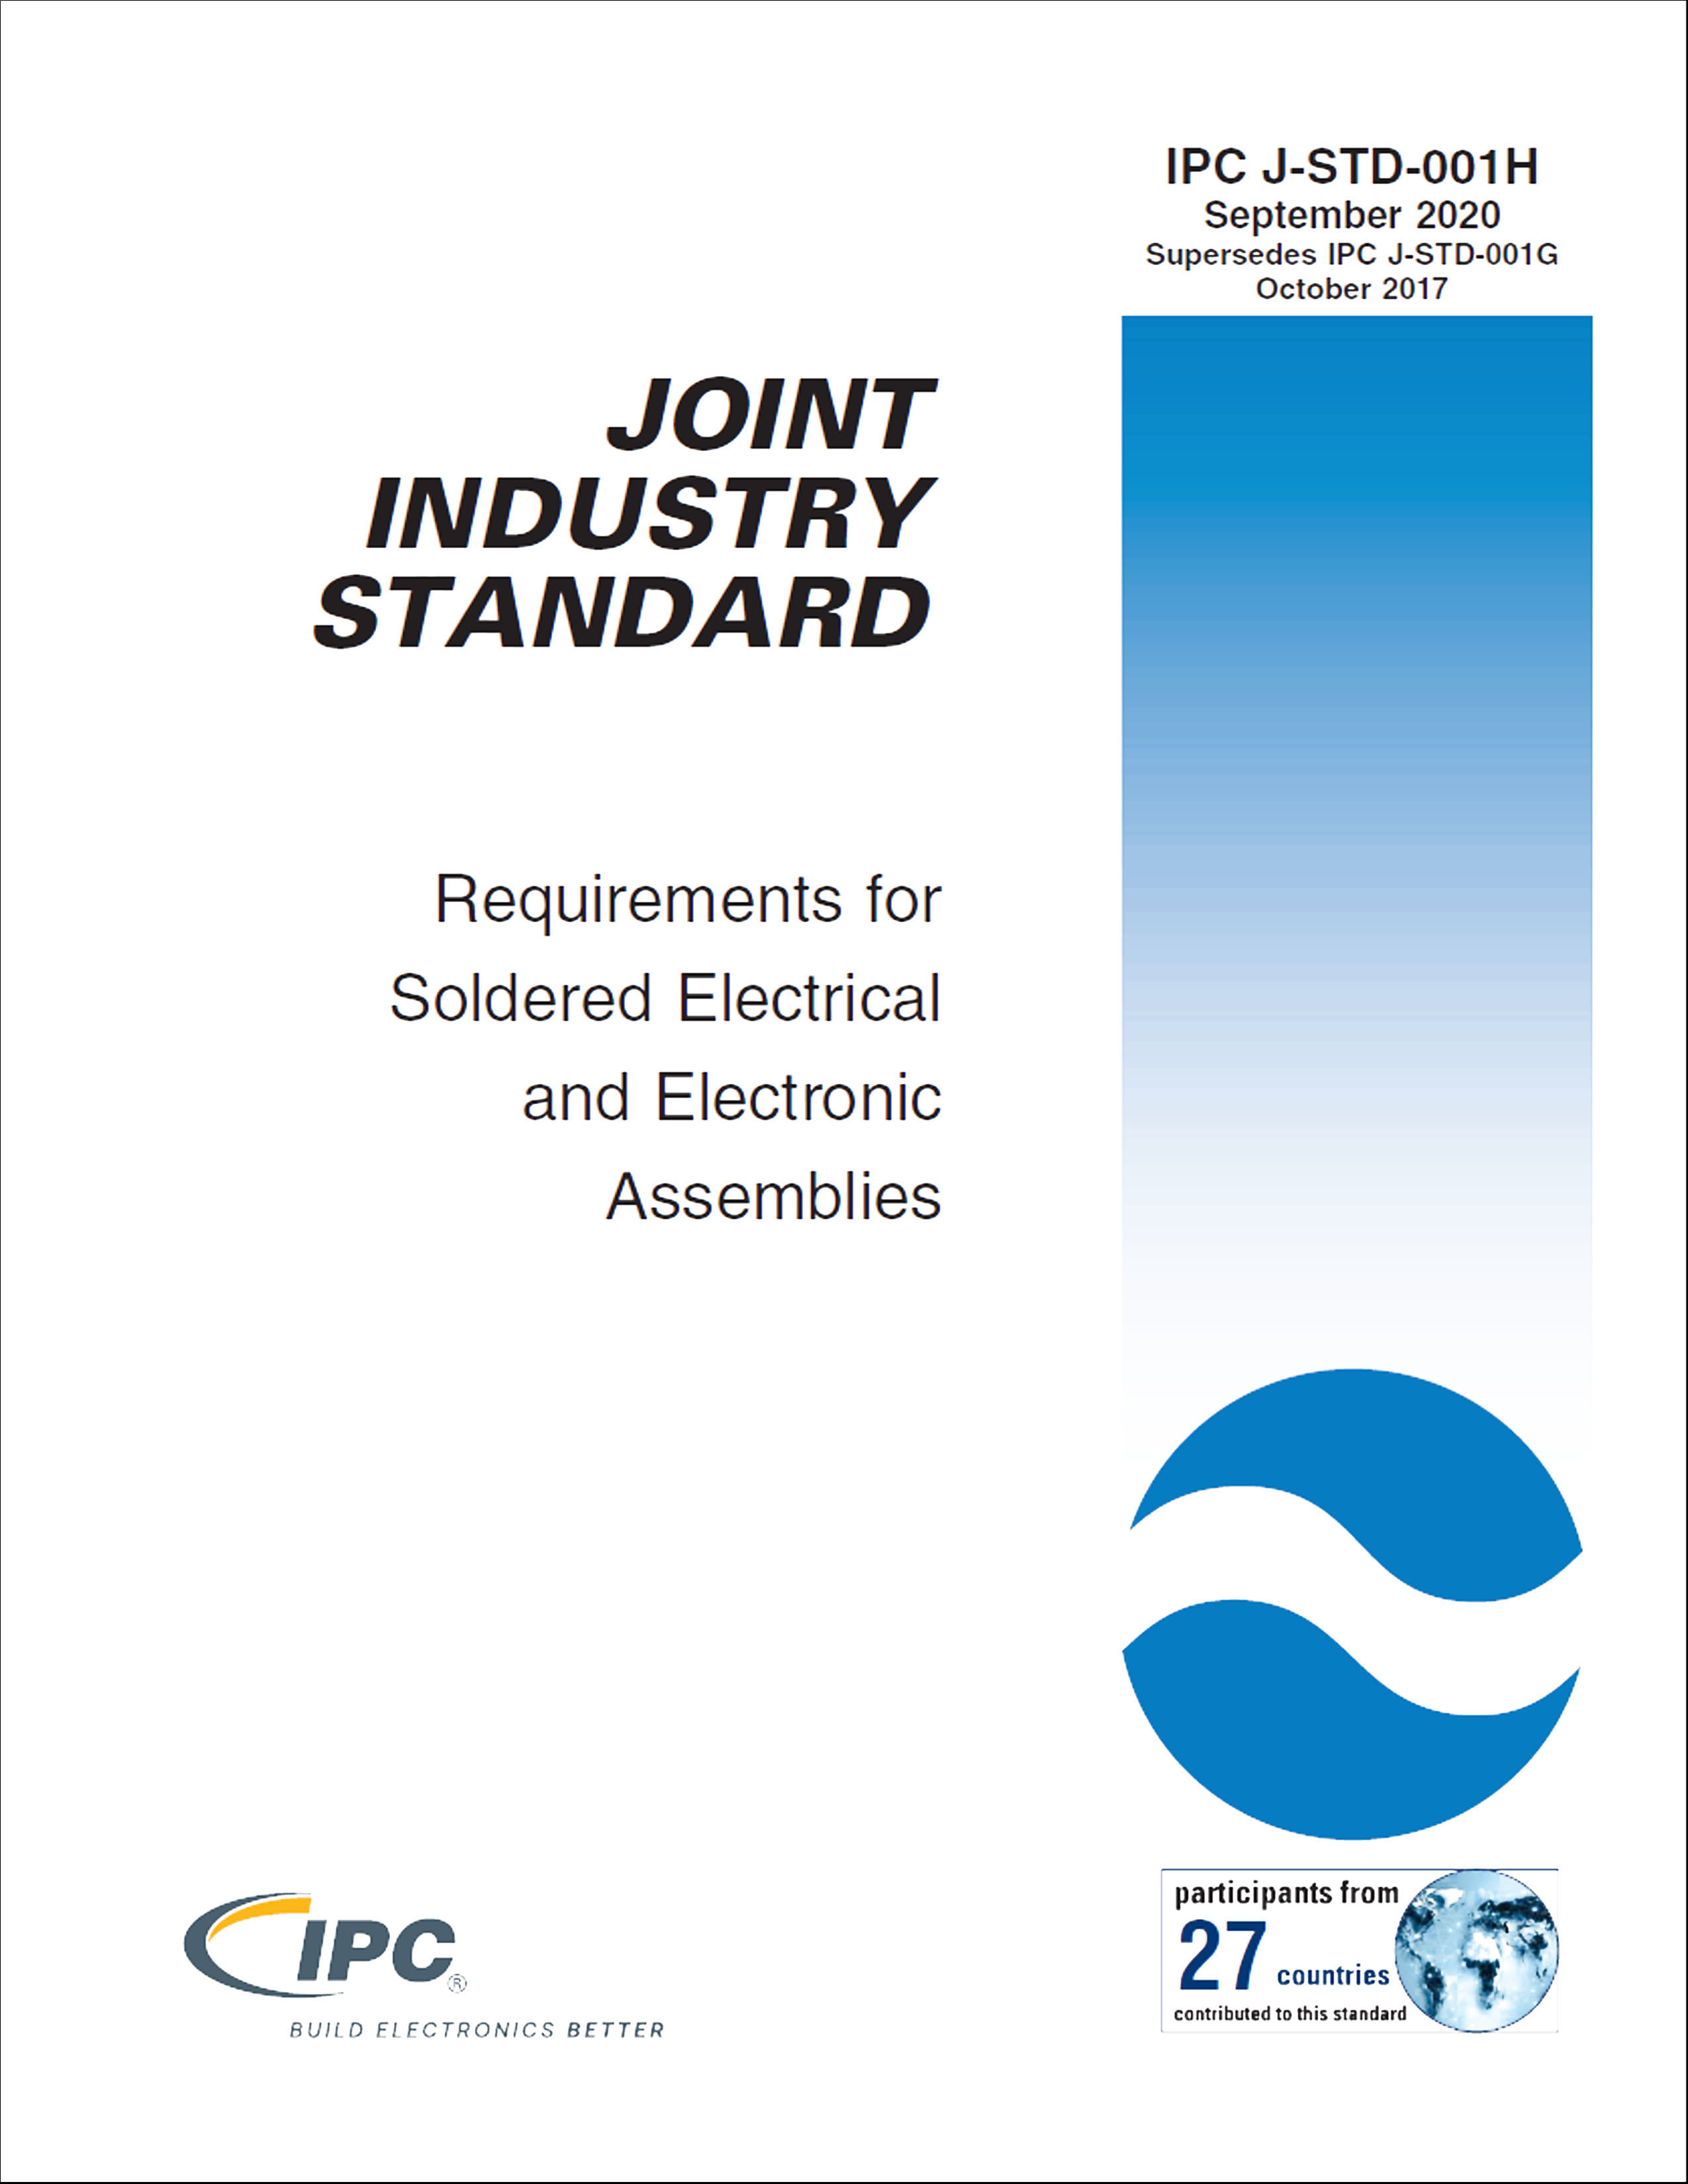 IPC JSTD001H Requirements for Soldered Electrical and Electronic Assemblies